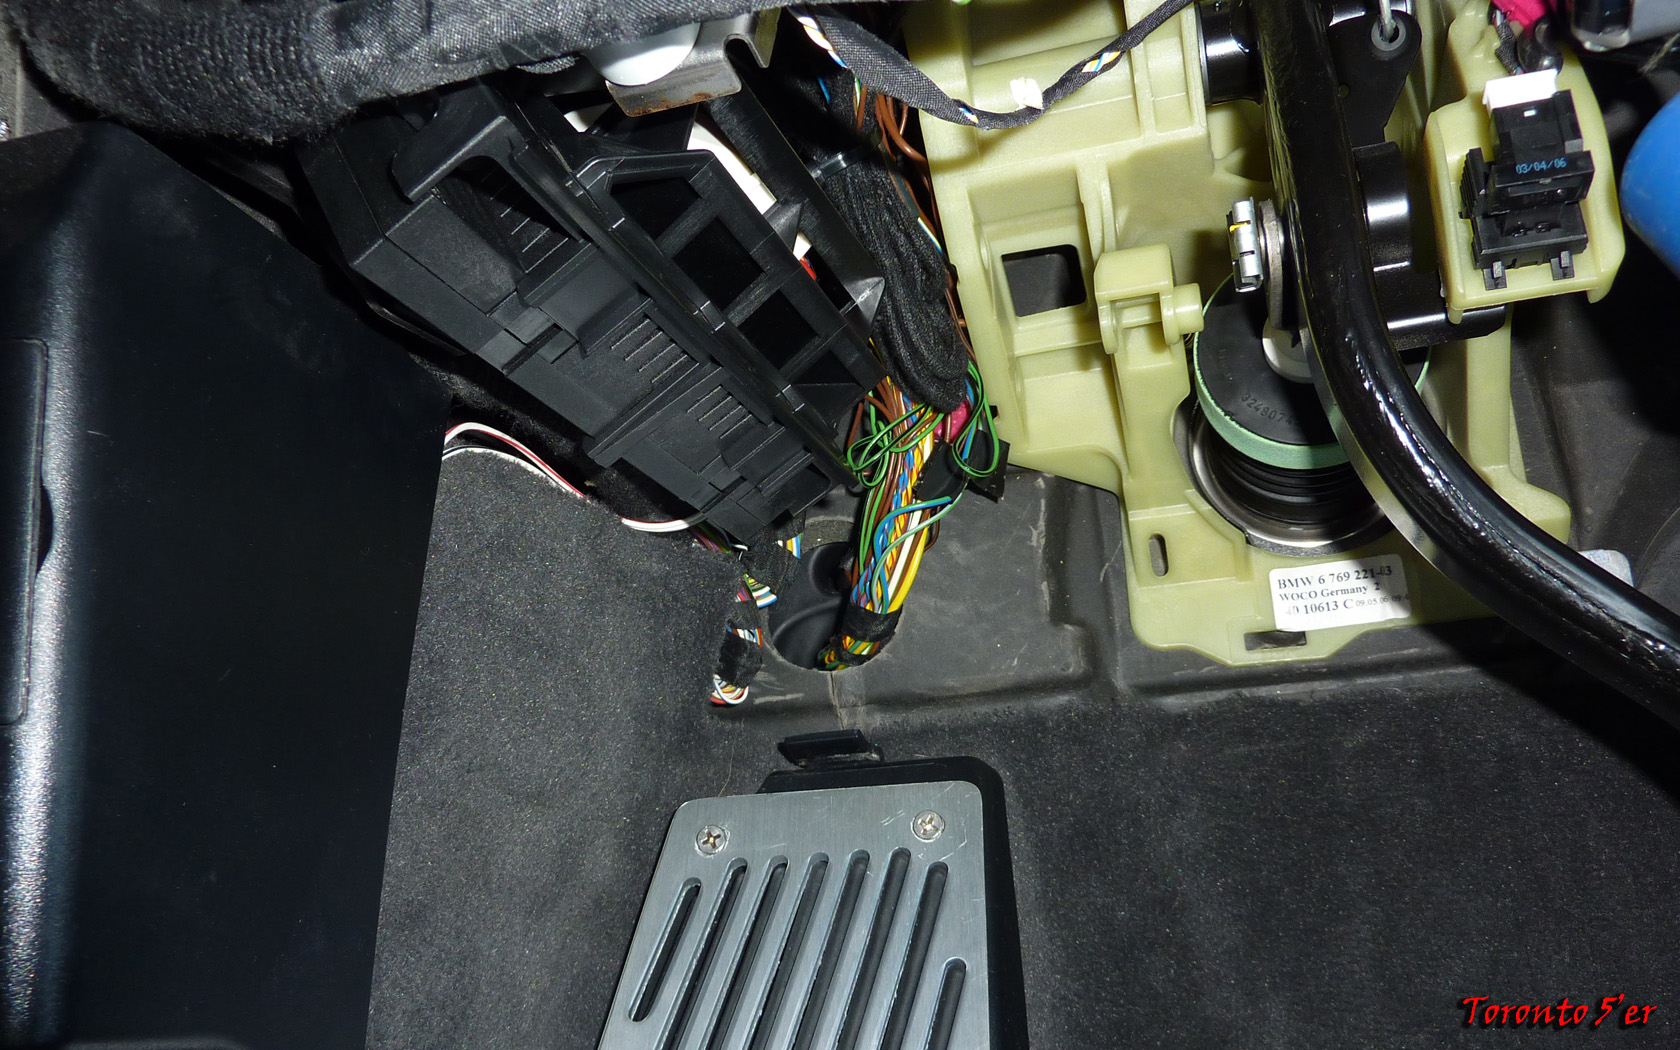 Pre-LCI to LCI Lights - What to look out for during the ... bmw x6 fuse box 